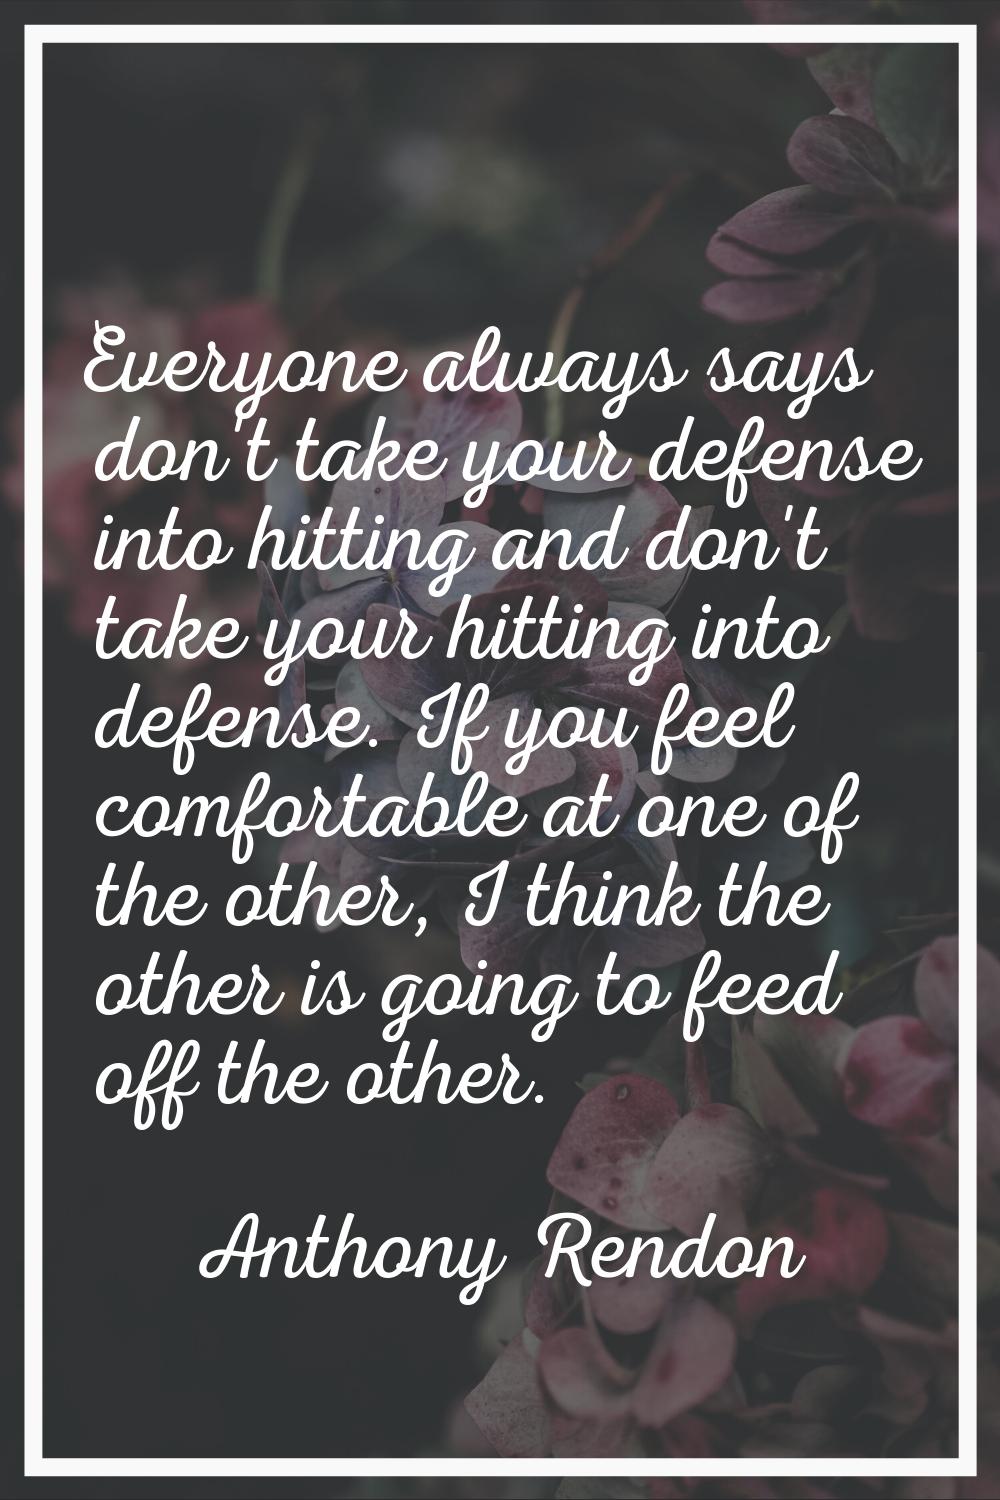 Everyone always says don't take your defense into hitting and don't take your hitting into defense.